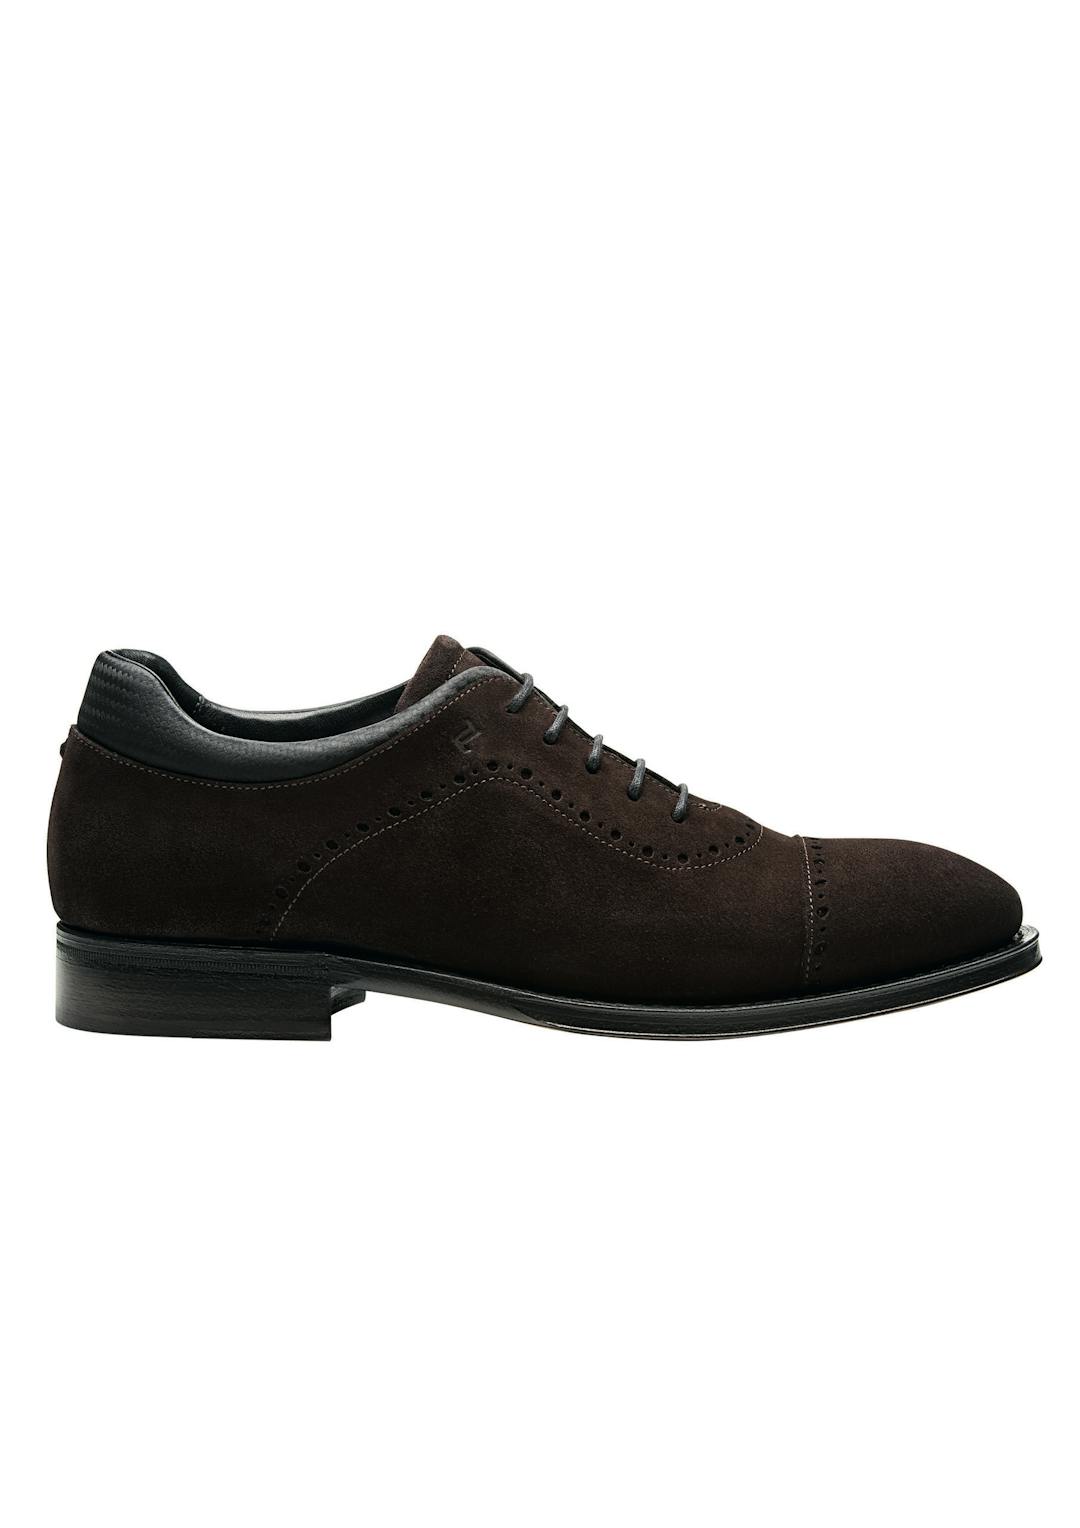 PorscheDesign_Shoes_BusinessCasualGYVelours_LaceUp_MoleBrown